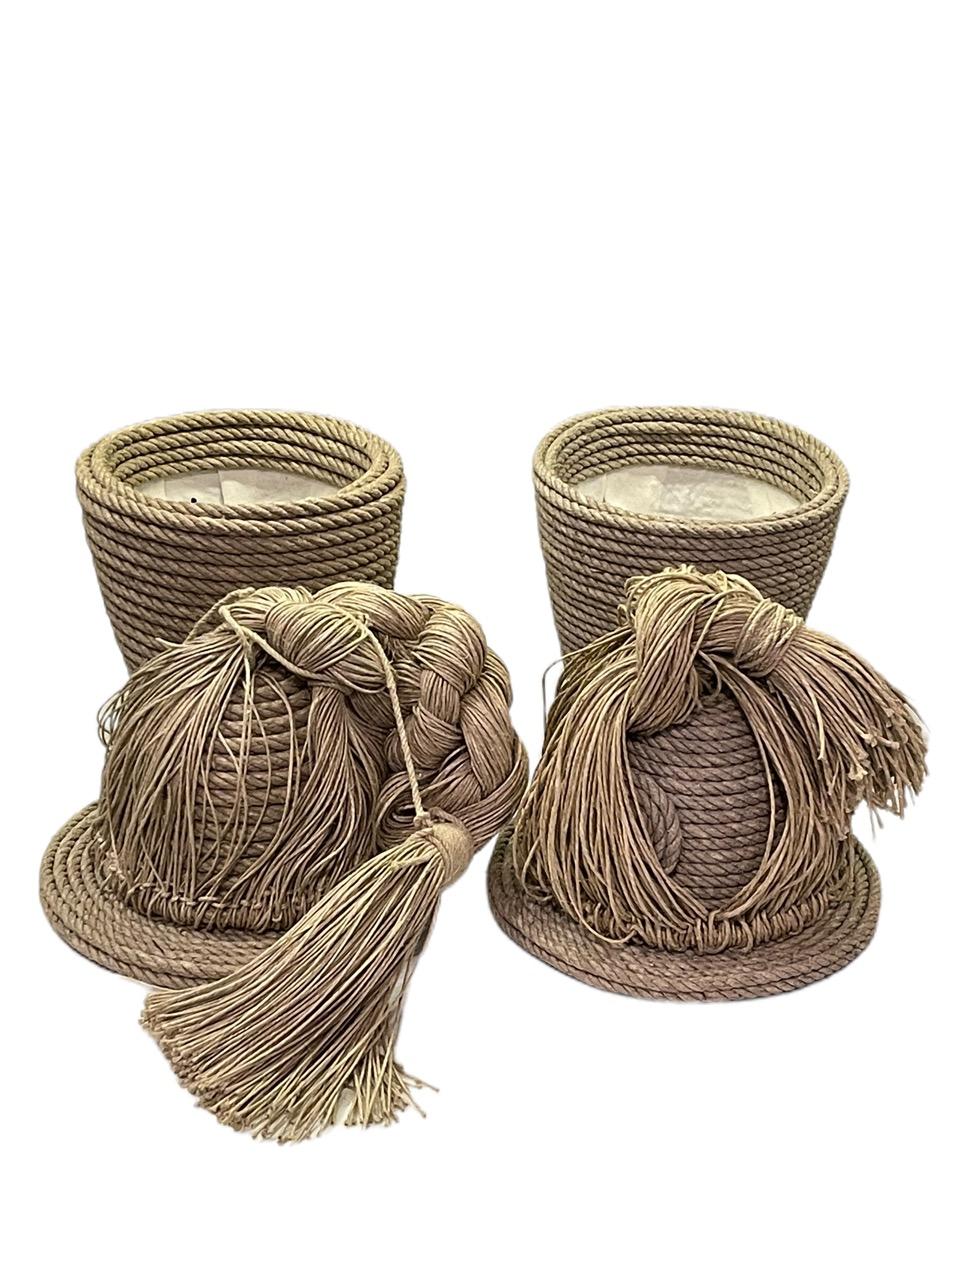 Pair of Contemporary 21st Century French Christian Astuguevieille Jute Rope Co In Fair Condition In North Miami, FL